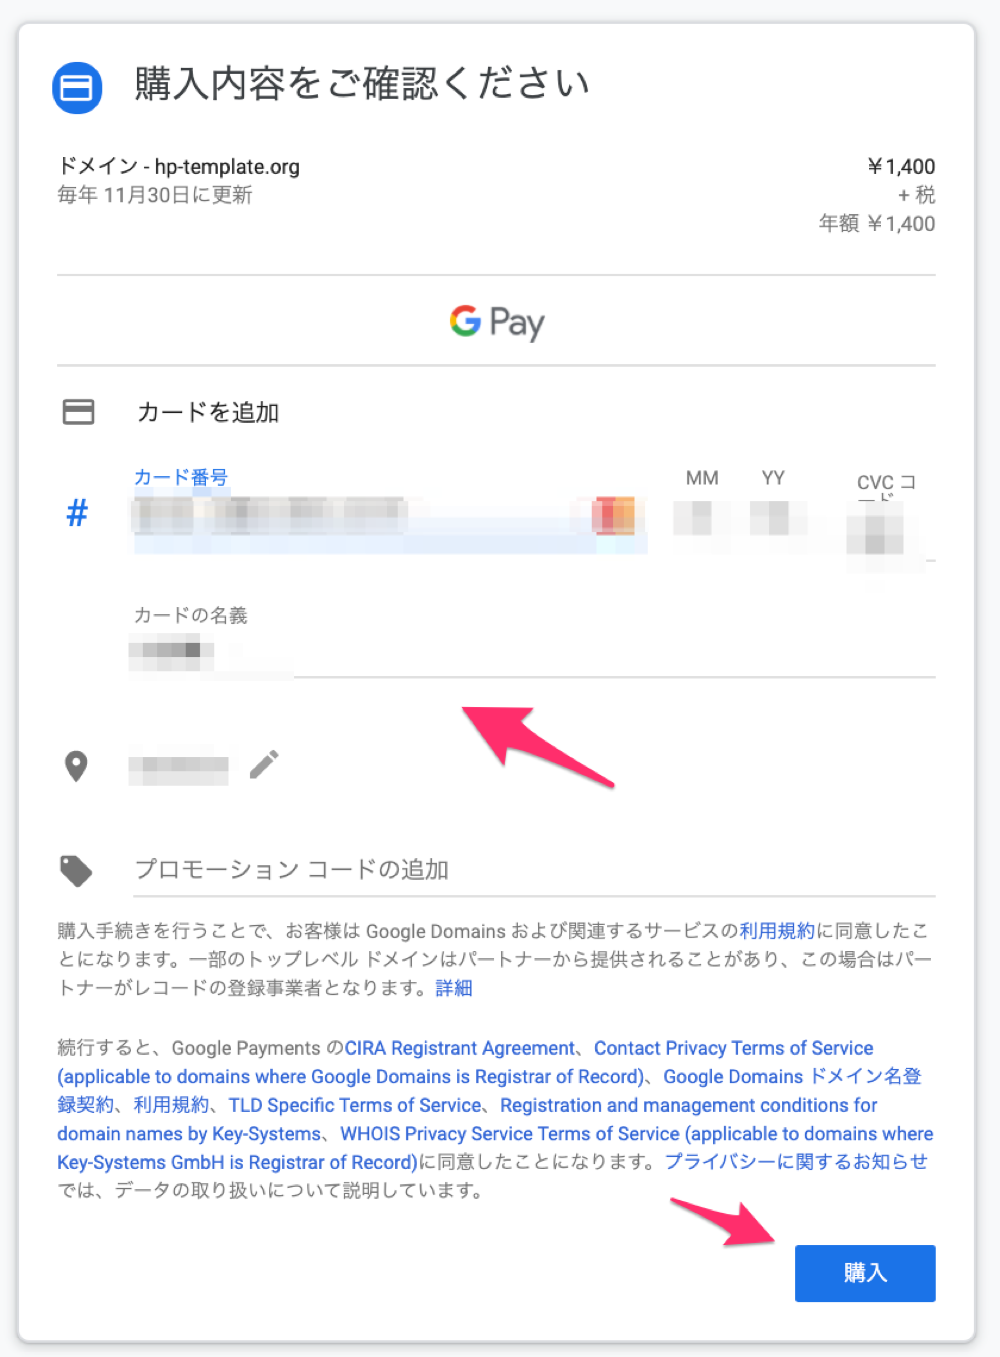 Google Domains Pay Info